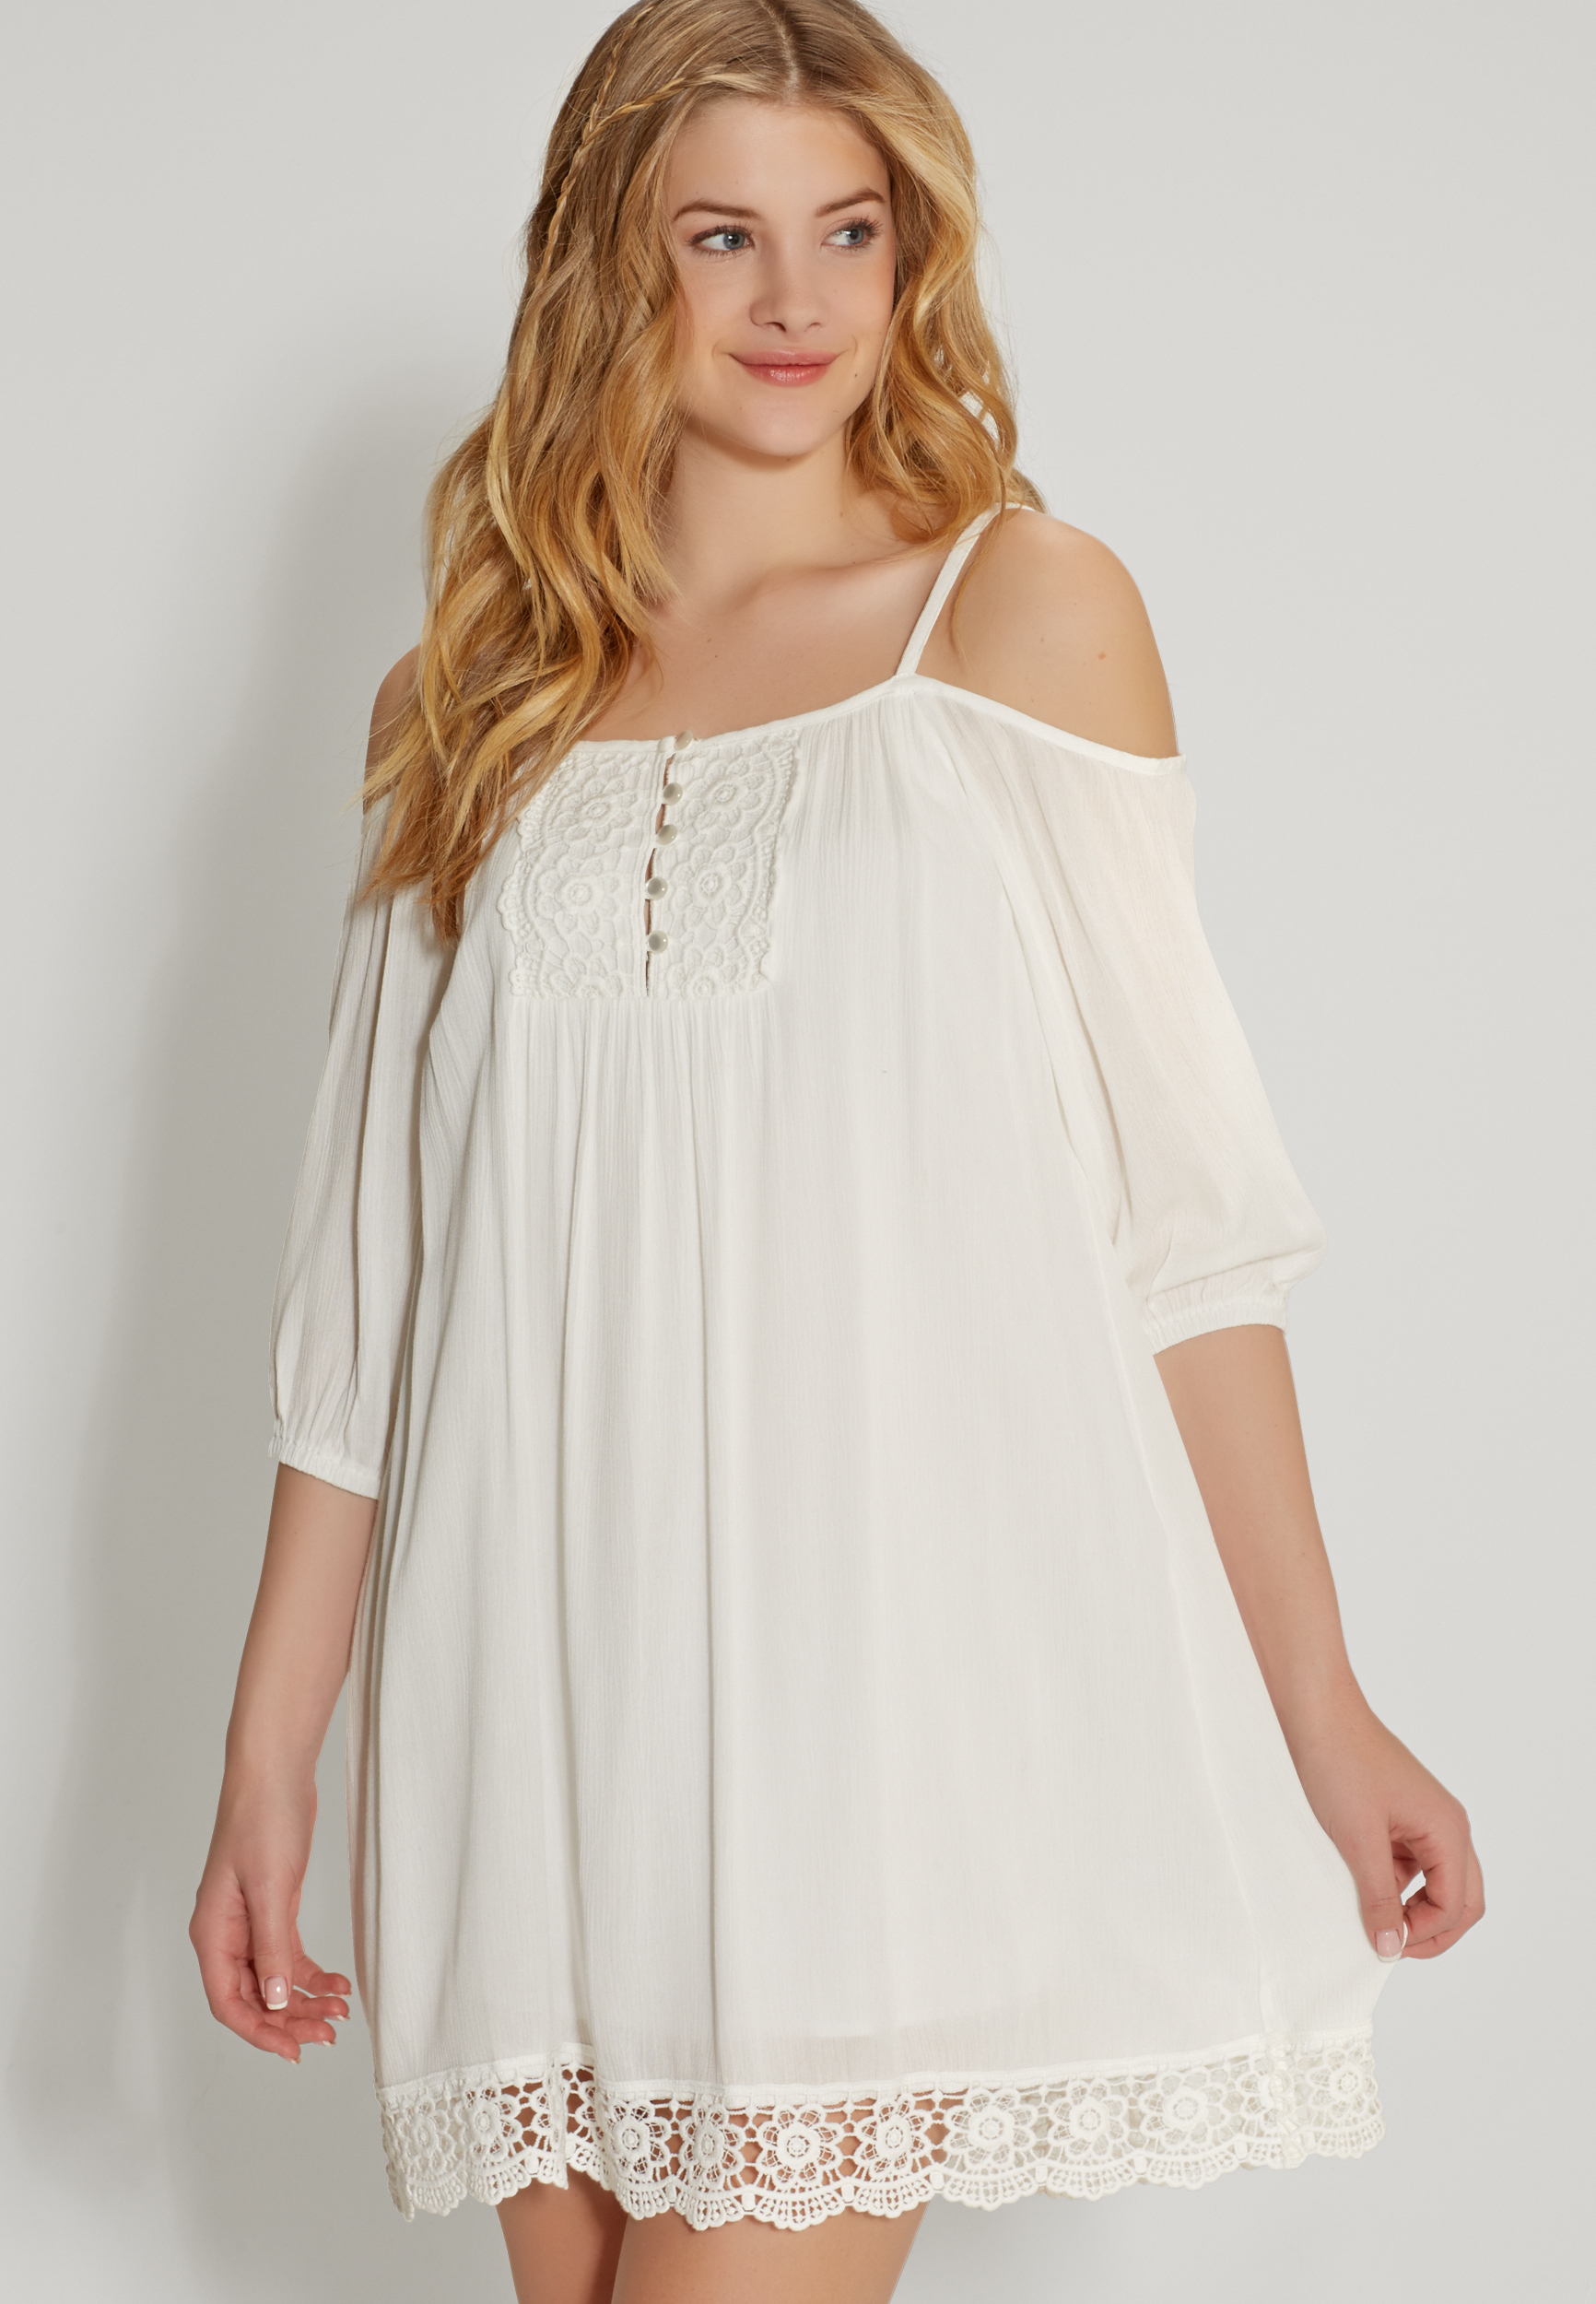 peasant dress with lace and cold shoulder sleeves | maurices